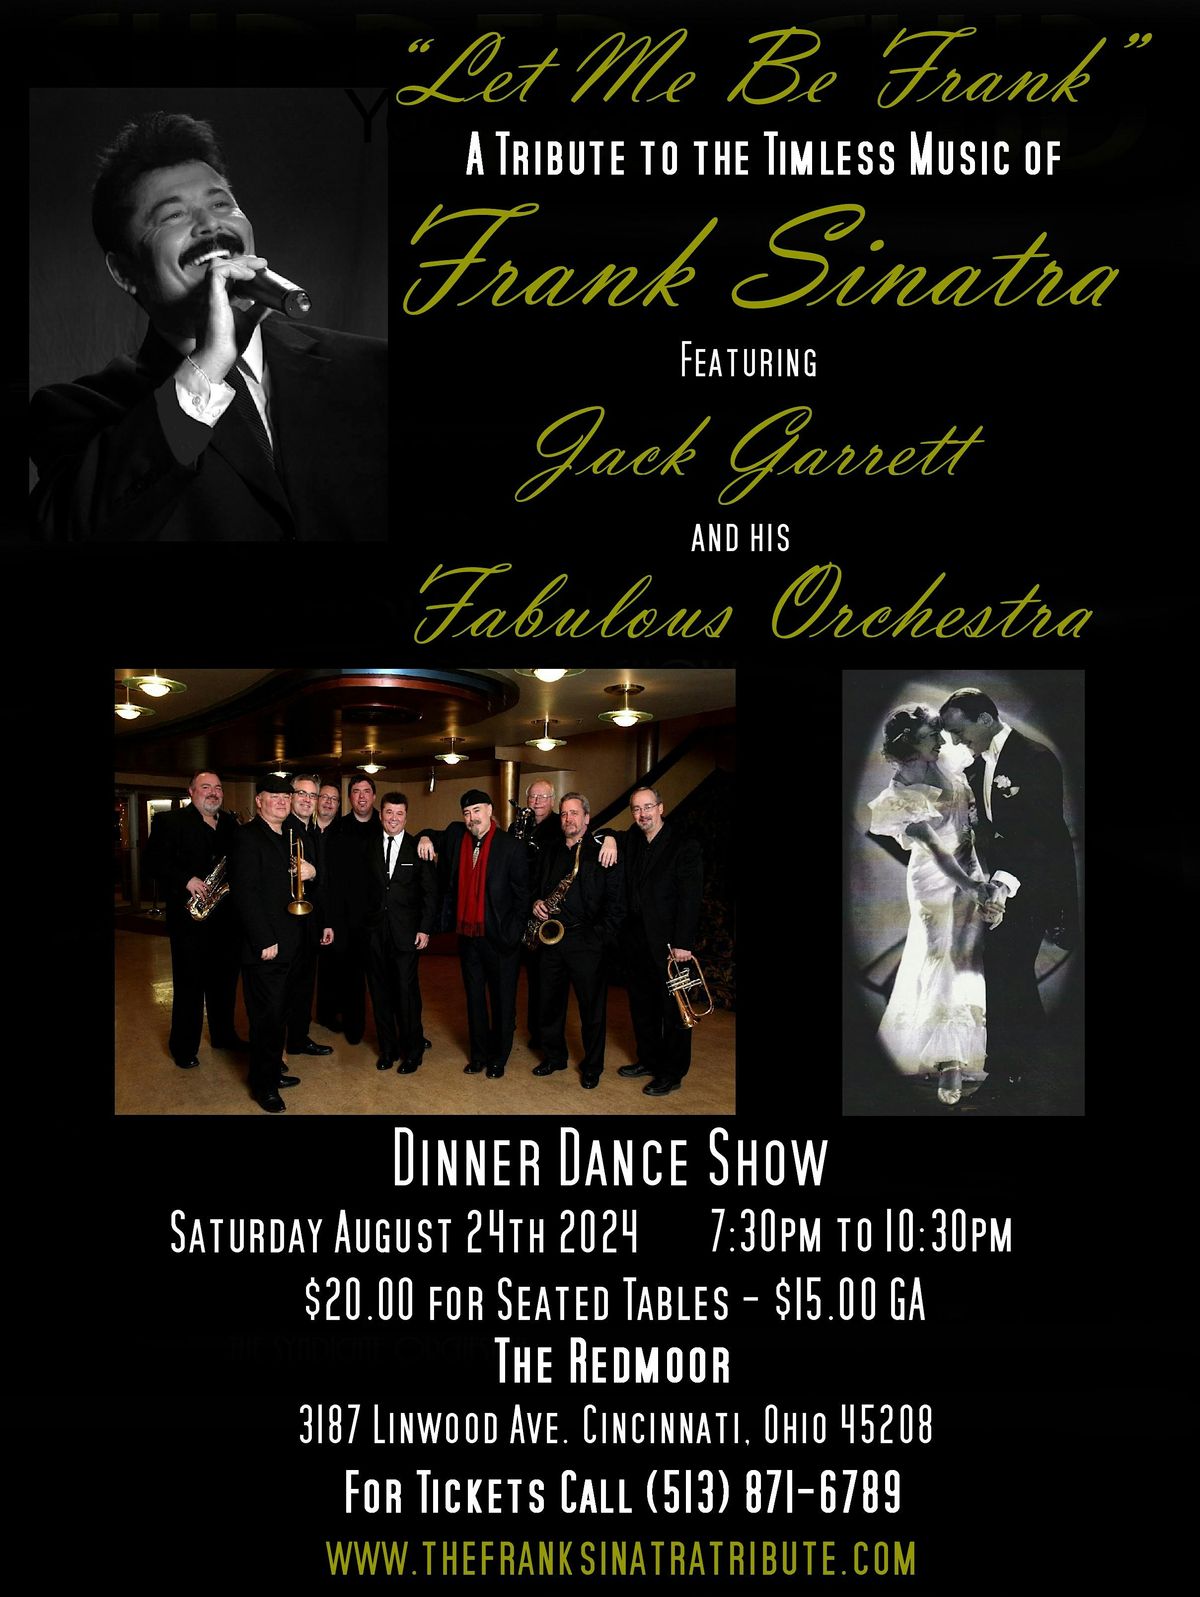 "Let Me Be Frank" A Tribute To The Timeless Music of Frank Sinatra